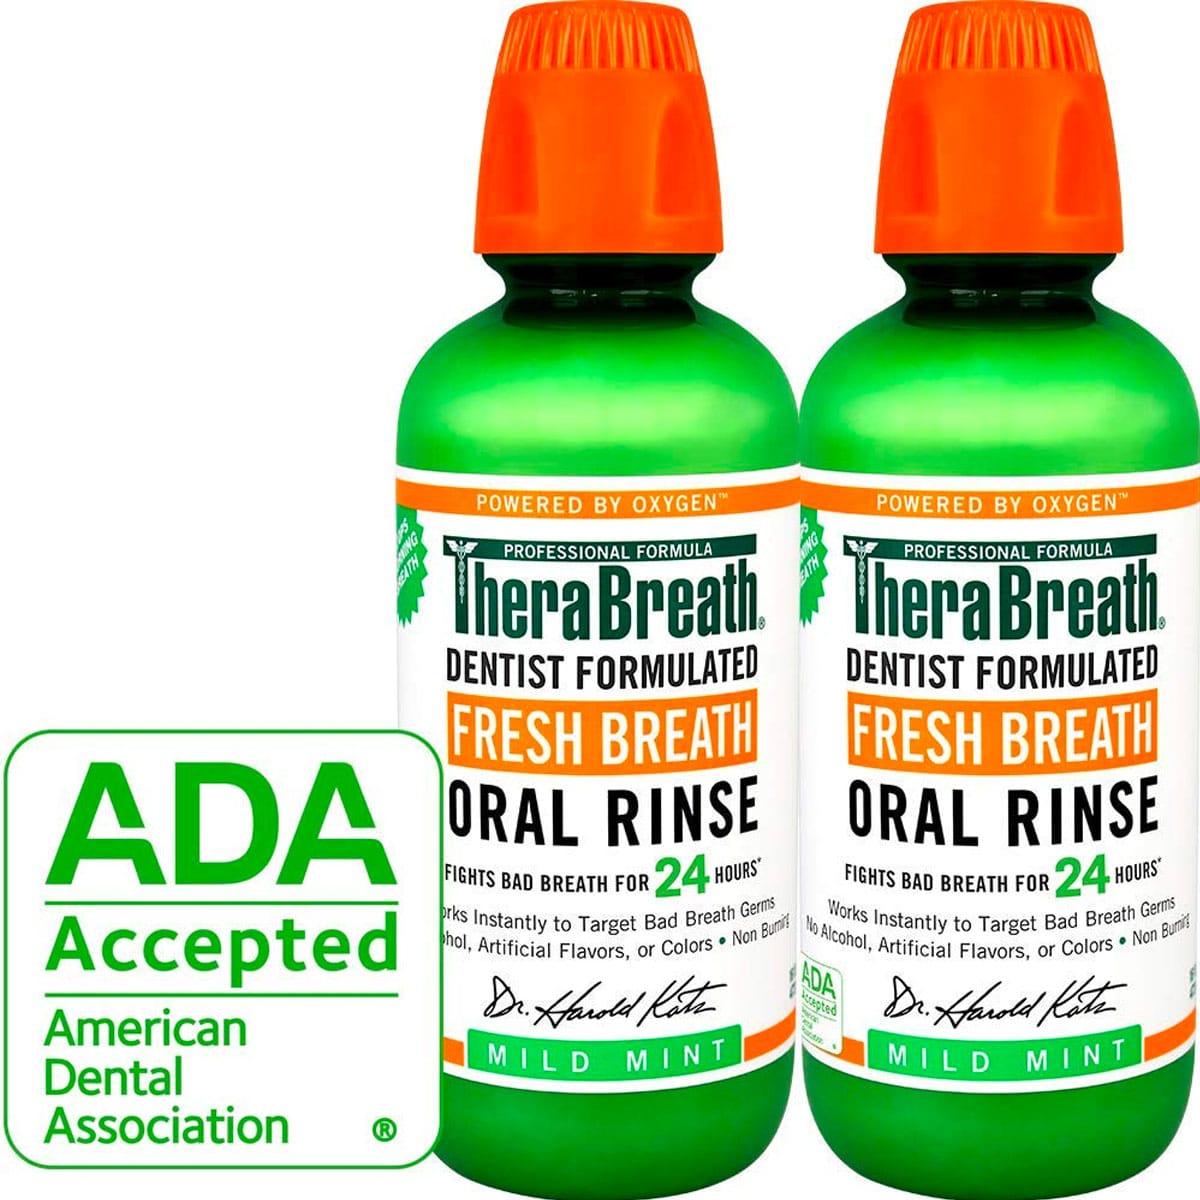 TheraBreath Fresh Breath Oral Rinse In Mild Mint (16 Oz. Bottle – Pack Of 2)